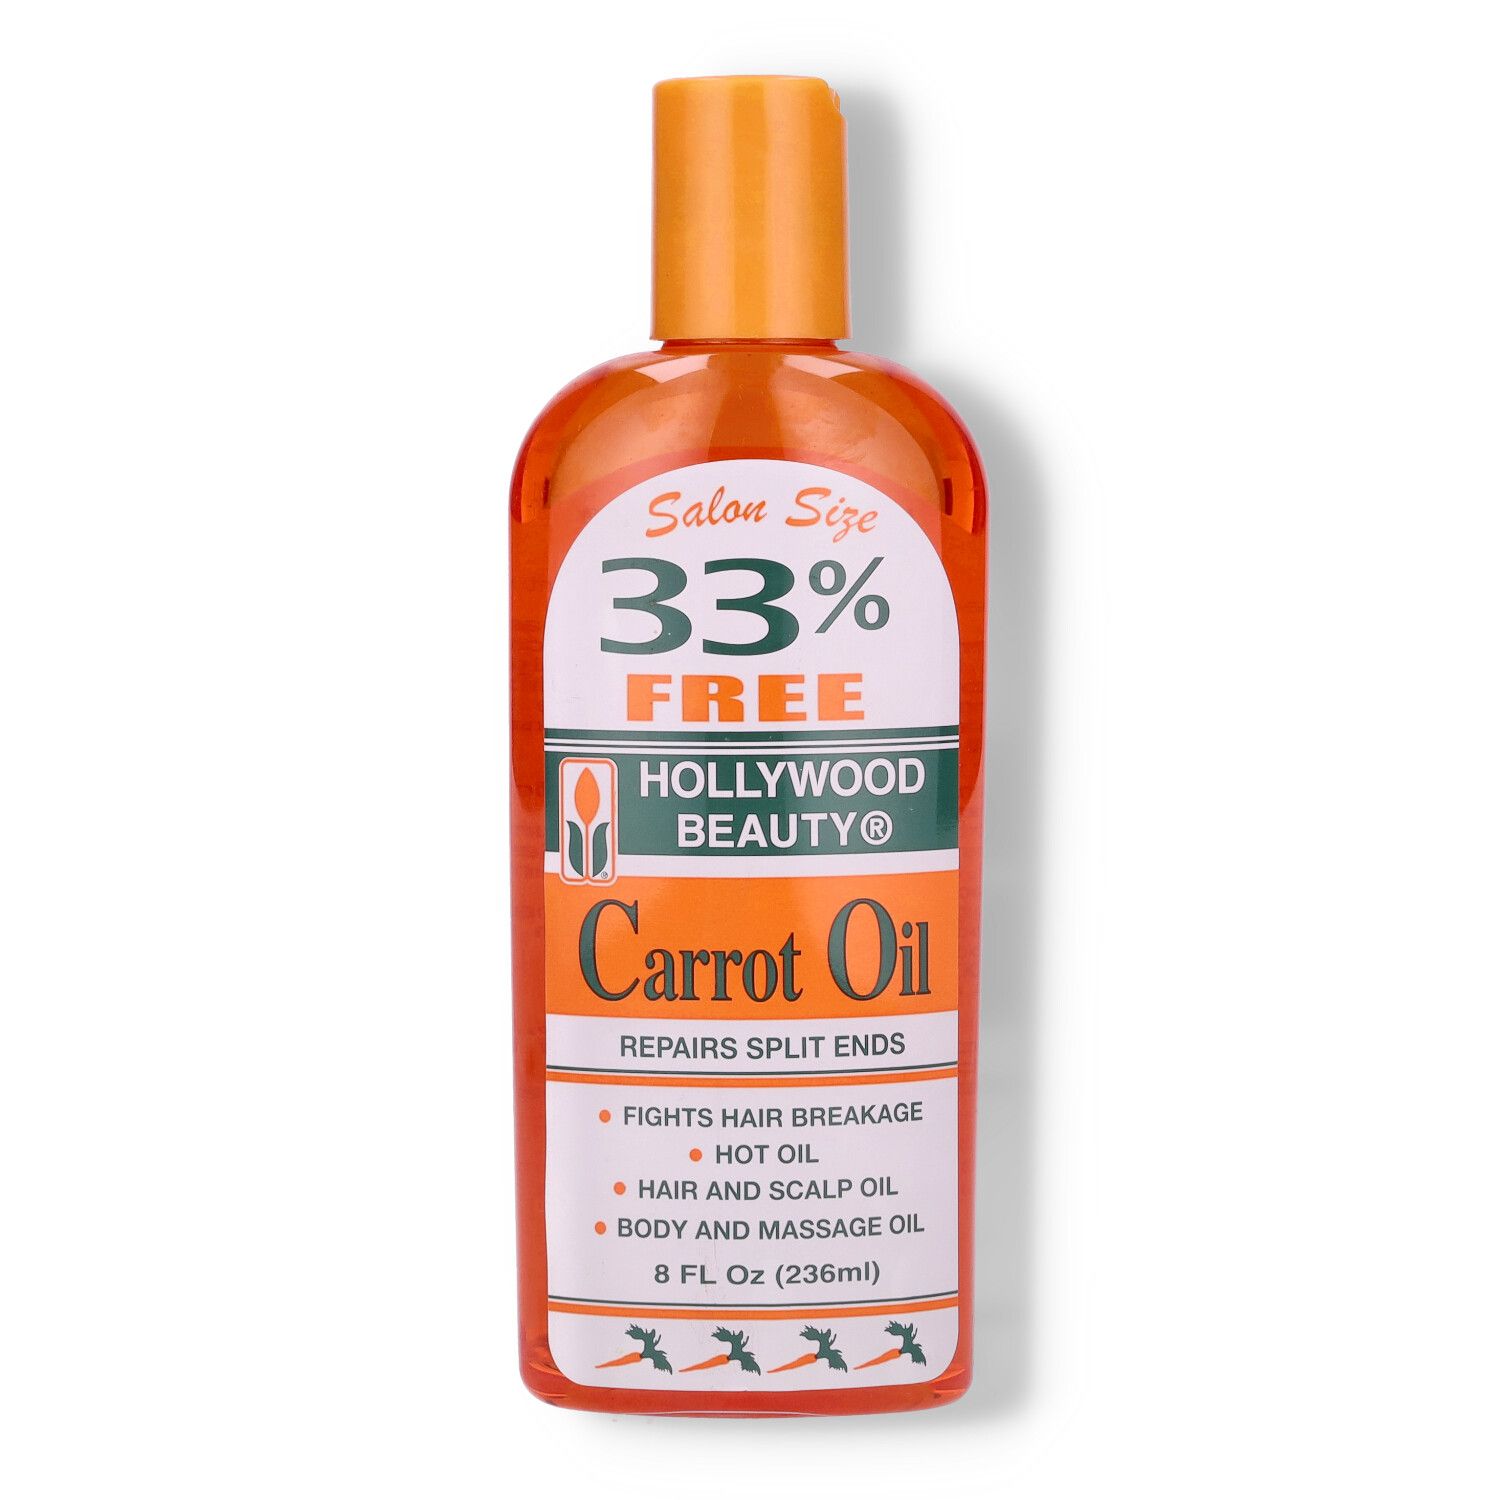 Hollywood Beauty Carrot Oil Repairs Split Ends - 8oz